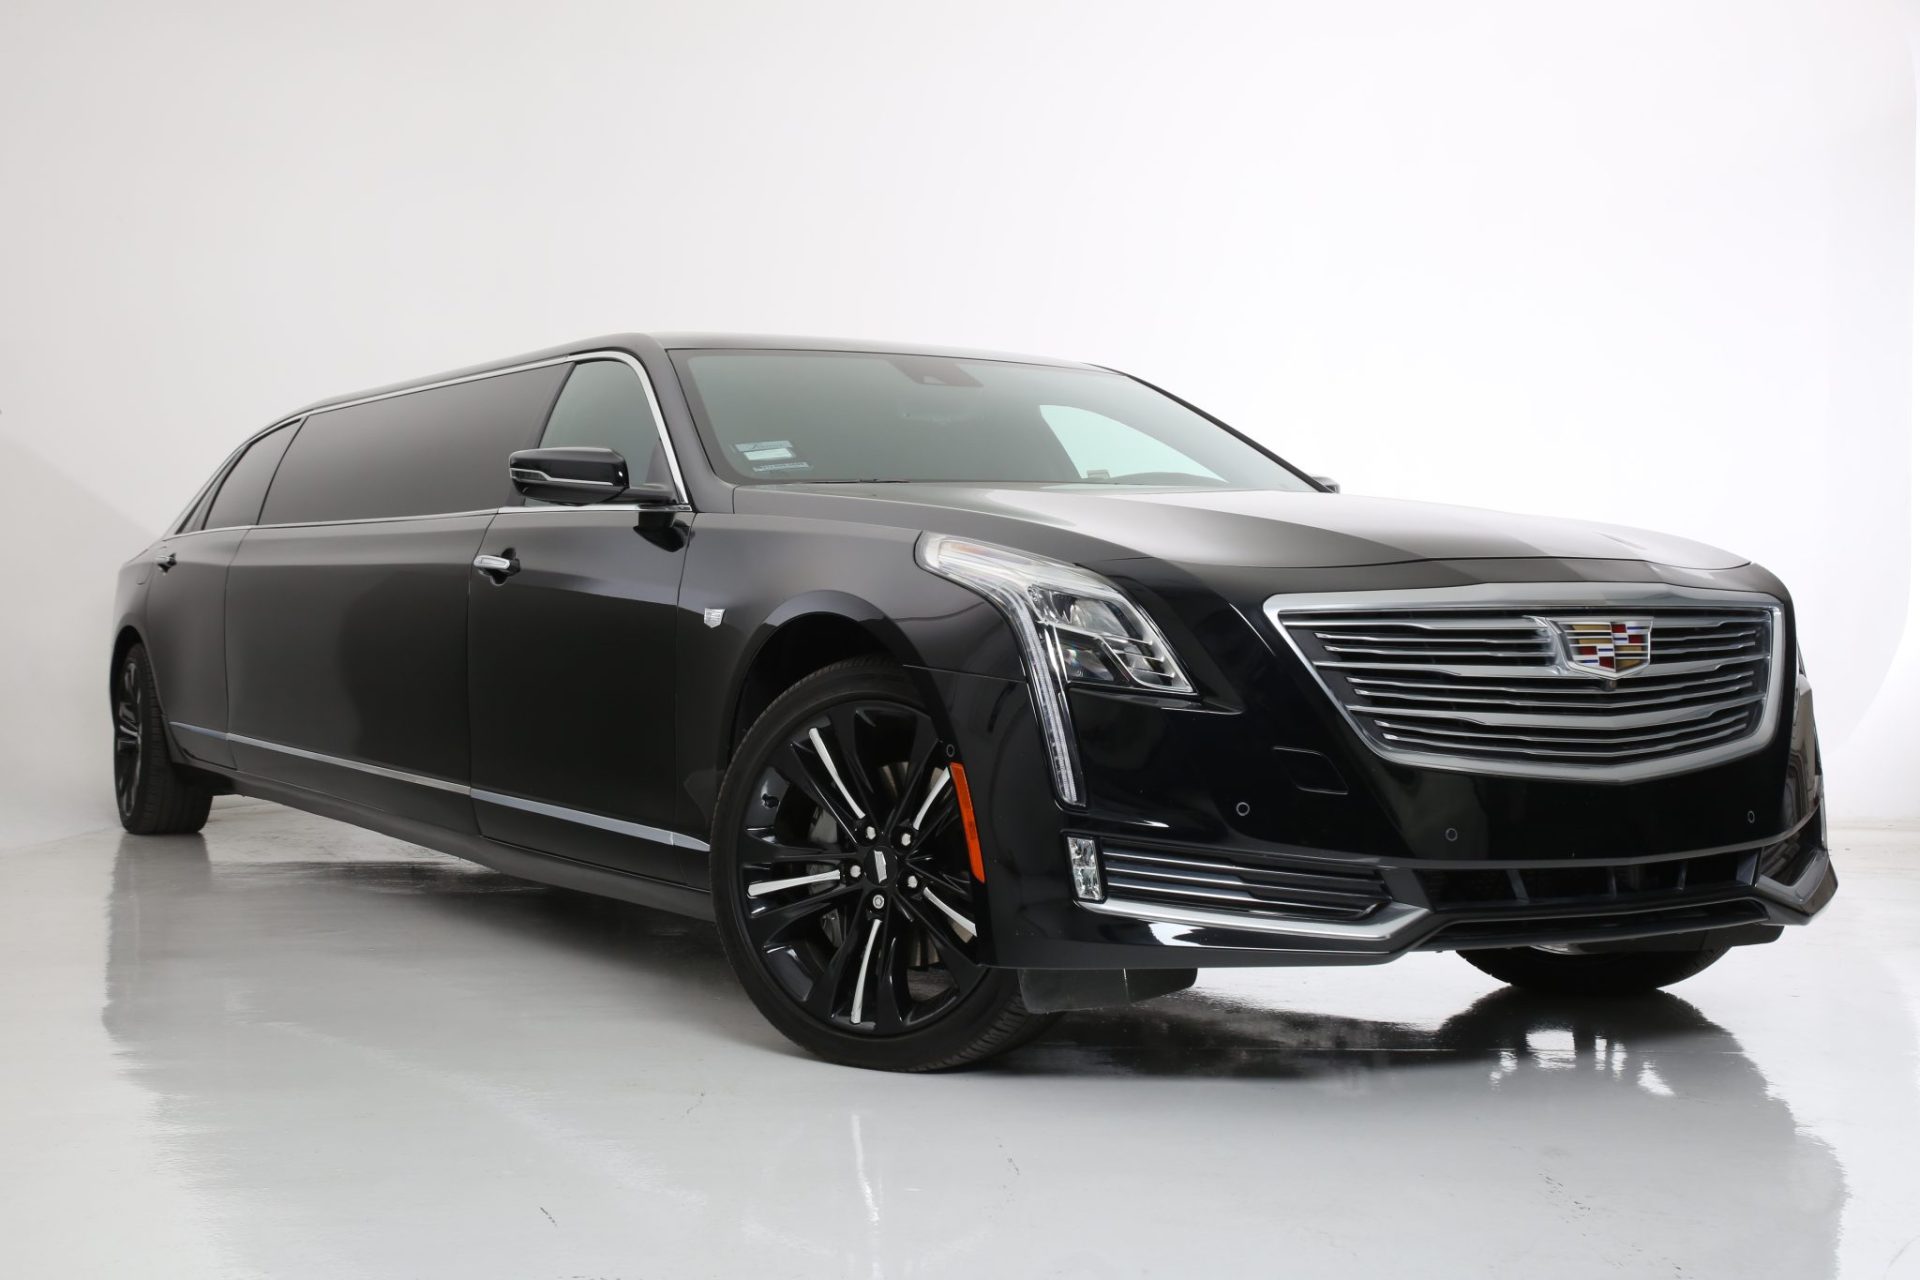 Cadillac CT6-V Stretched Limousine